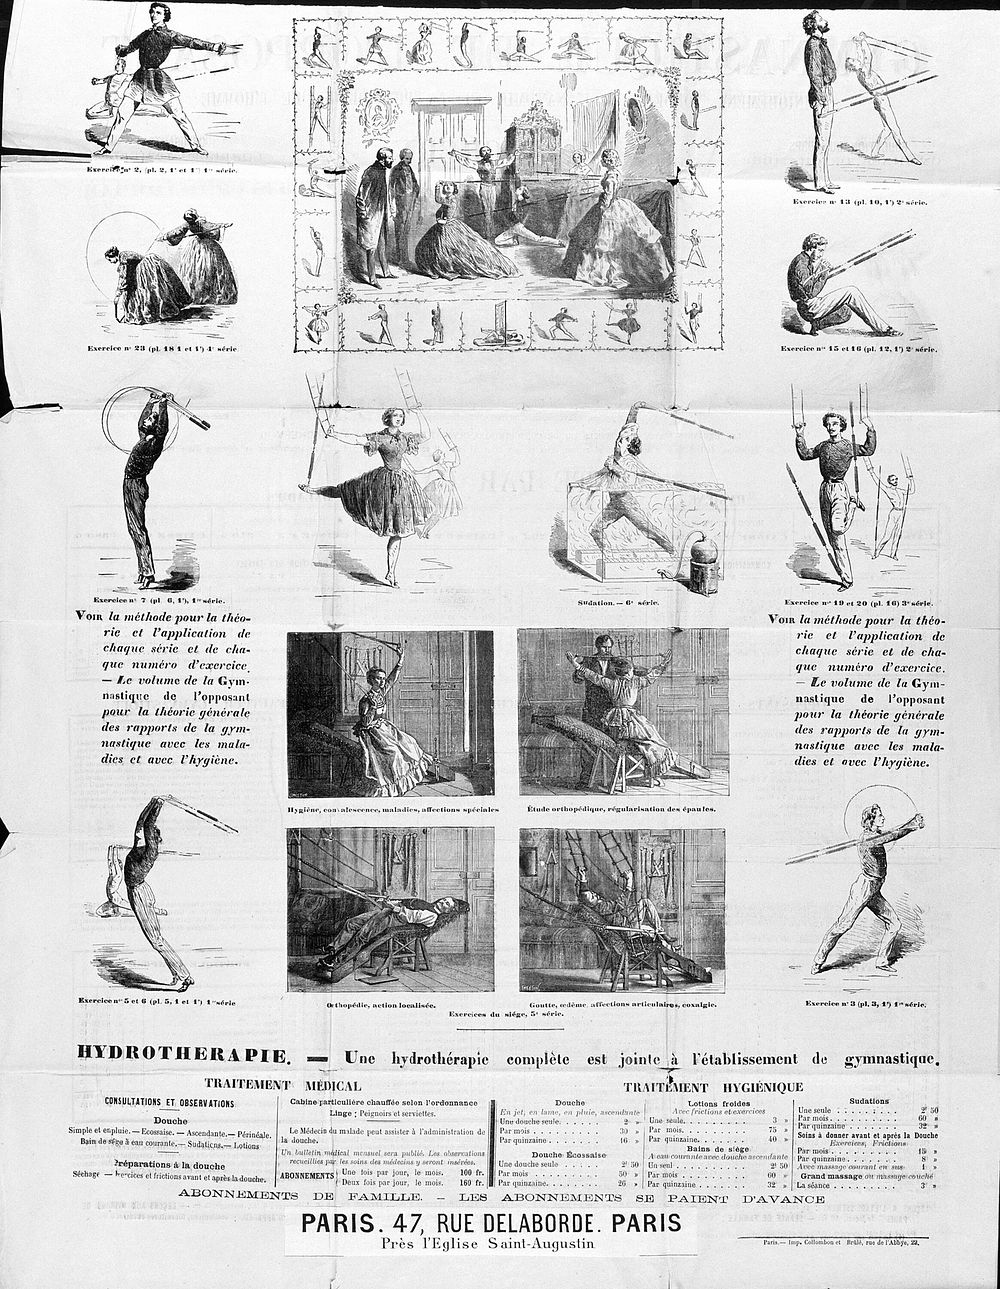 Men and women performing various exercises using the system of opposing forces devised by J.L. Pichery. Wood engravings, 18-…